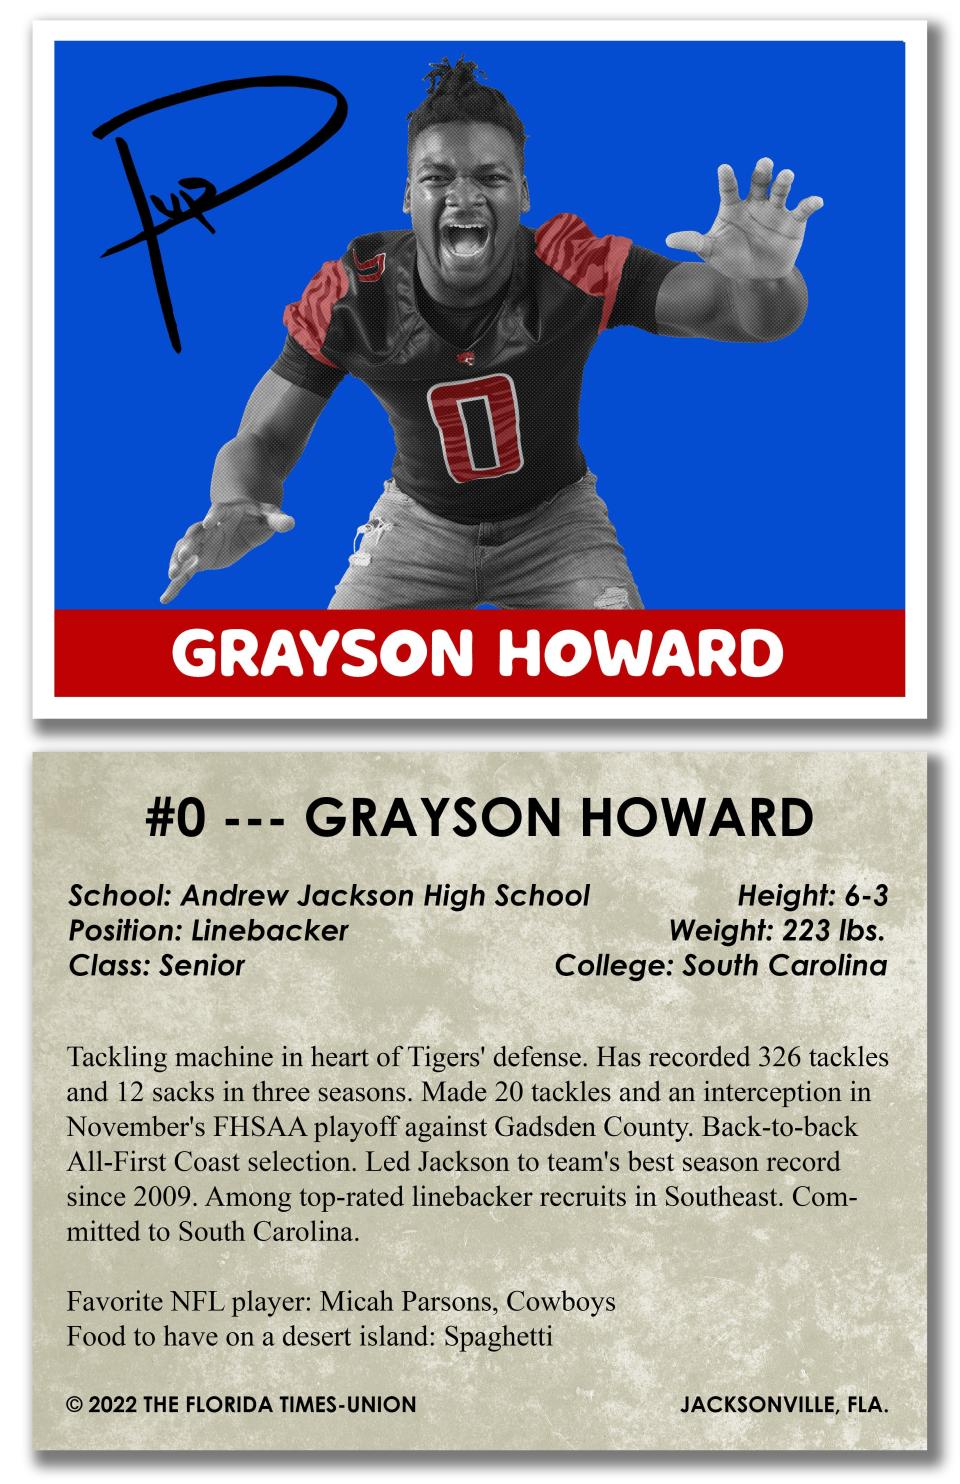 Jackson linebacker Grayson Howard is a selection on the Times-Union's annual Super 11 team for high school football in the 2023 recruiting class.